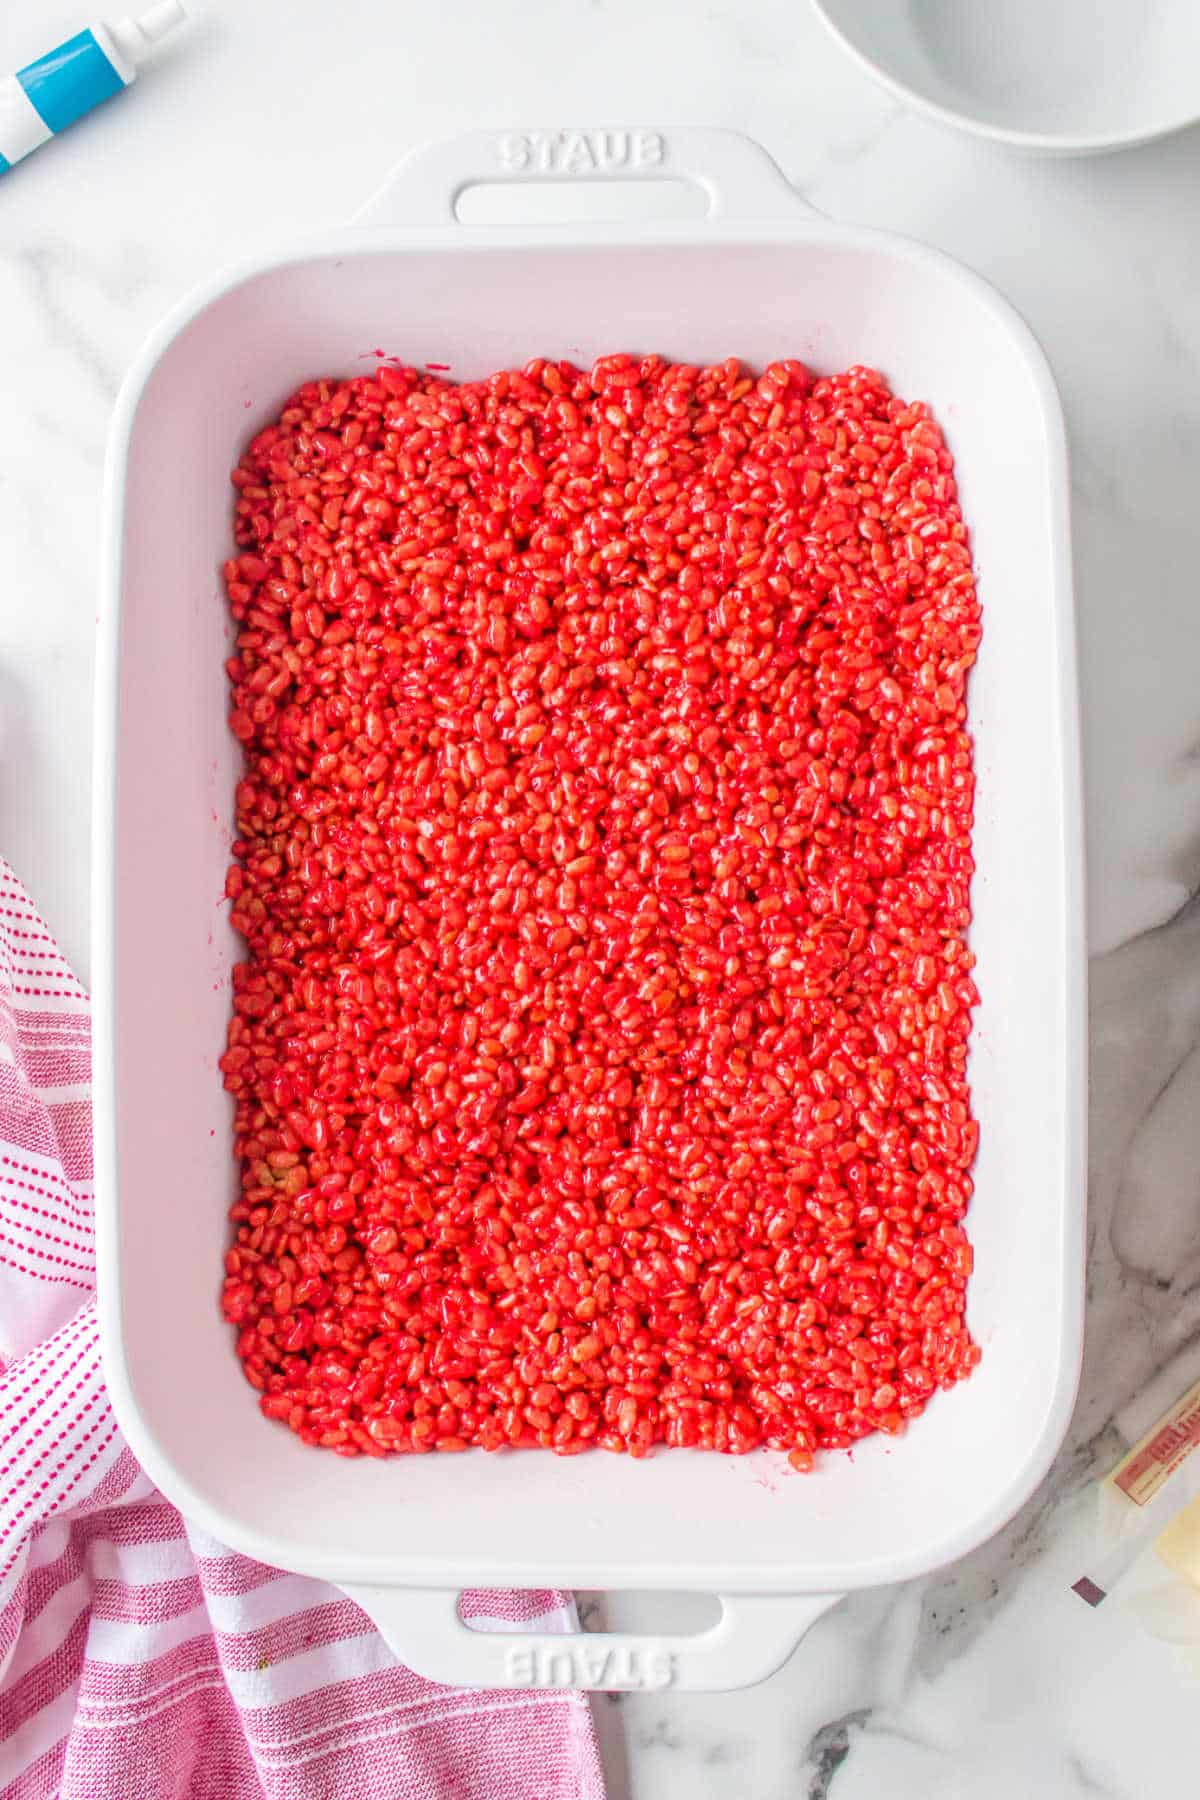 Red rice krispies treats in a pan.